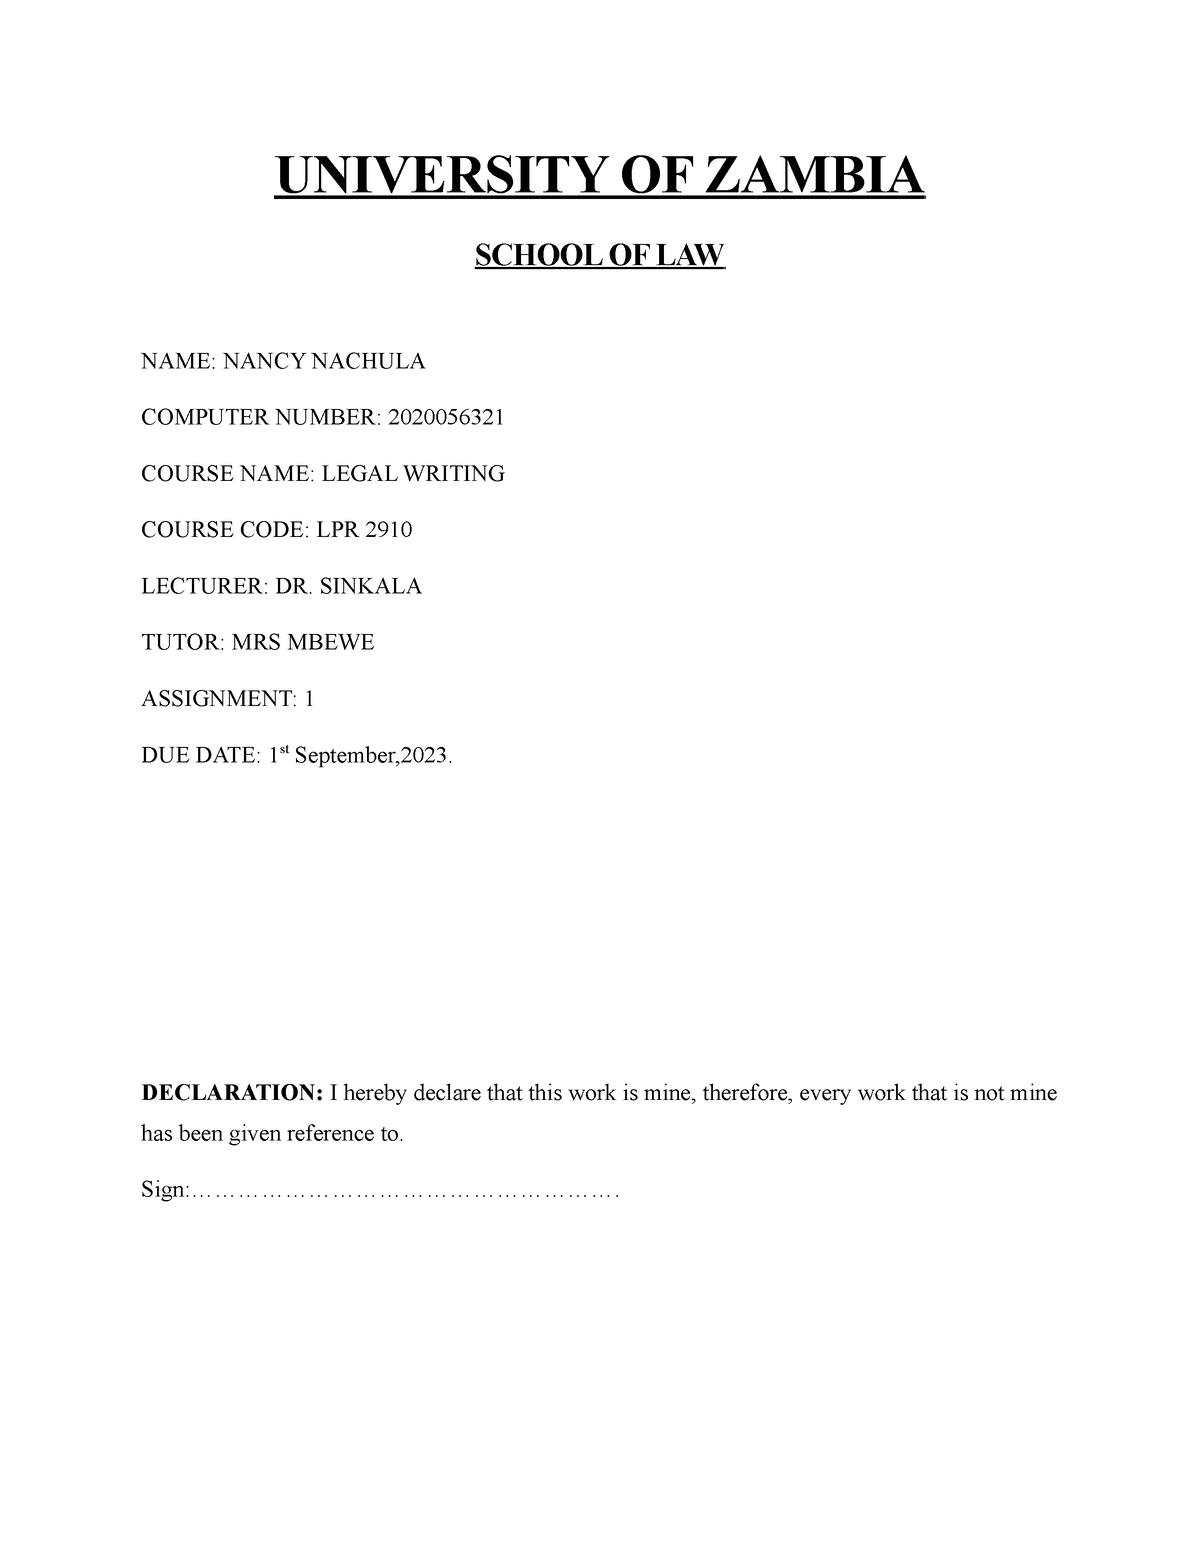 how to write an assignment in zambia